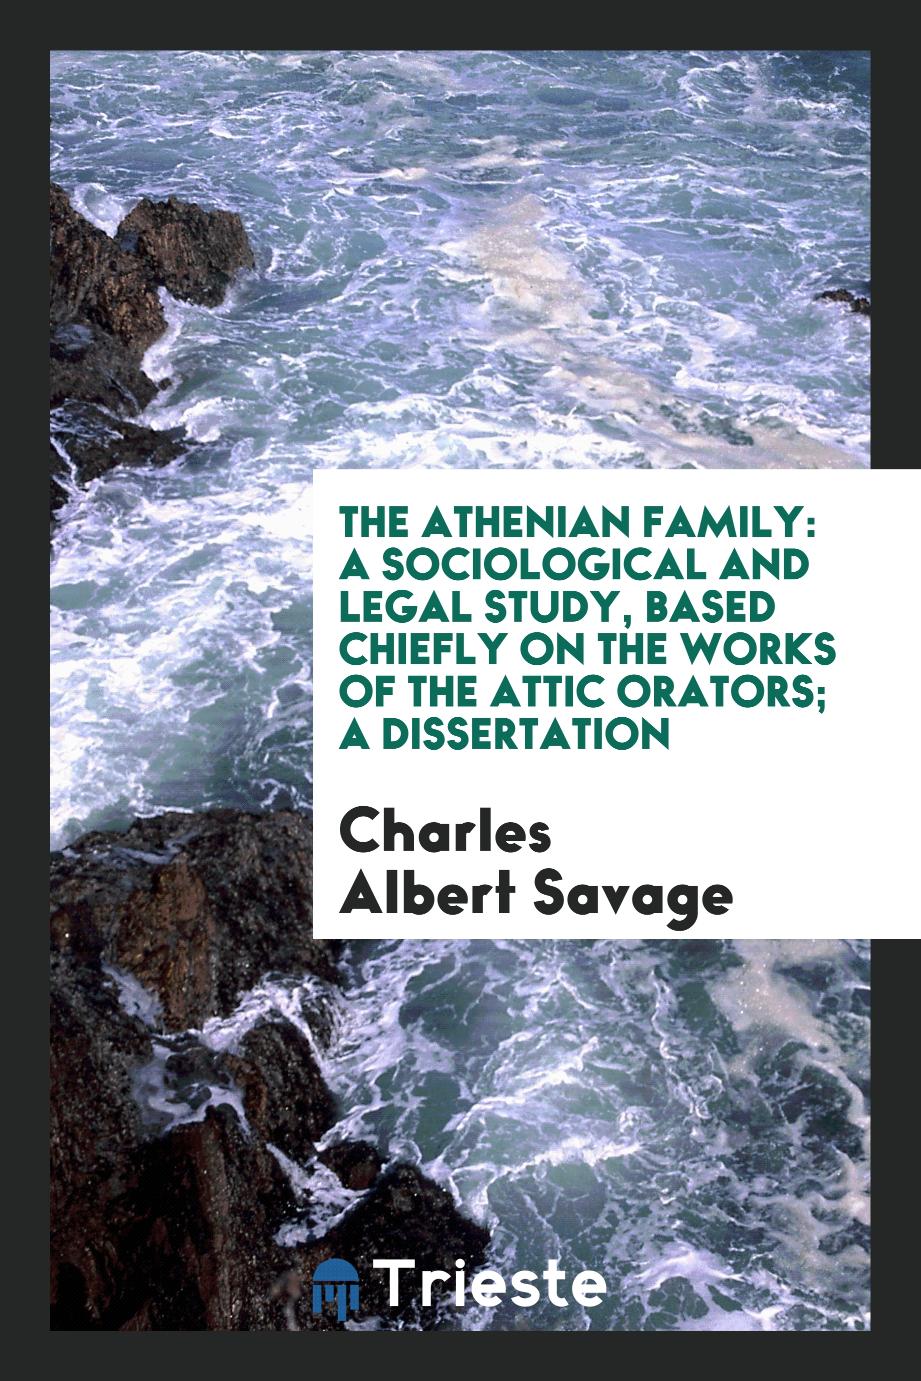 The Athenian Family: A Sociological and Legal Study, Based Chiefly on the Works of the Attic Orators; A Dissertation